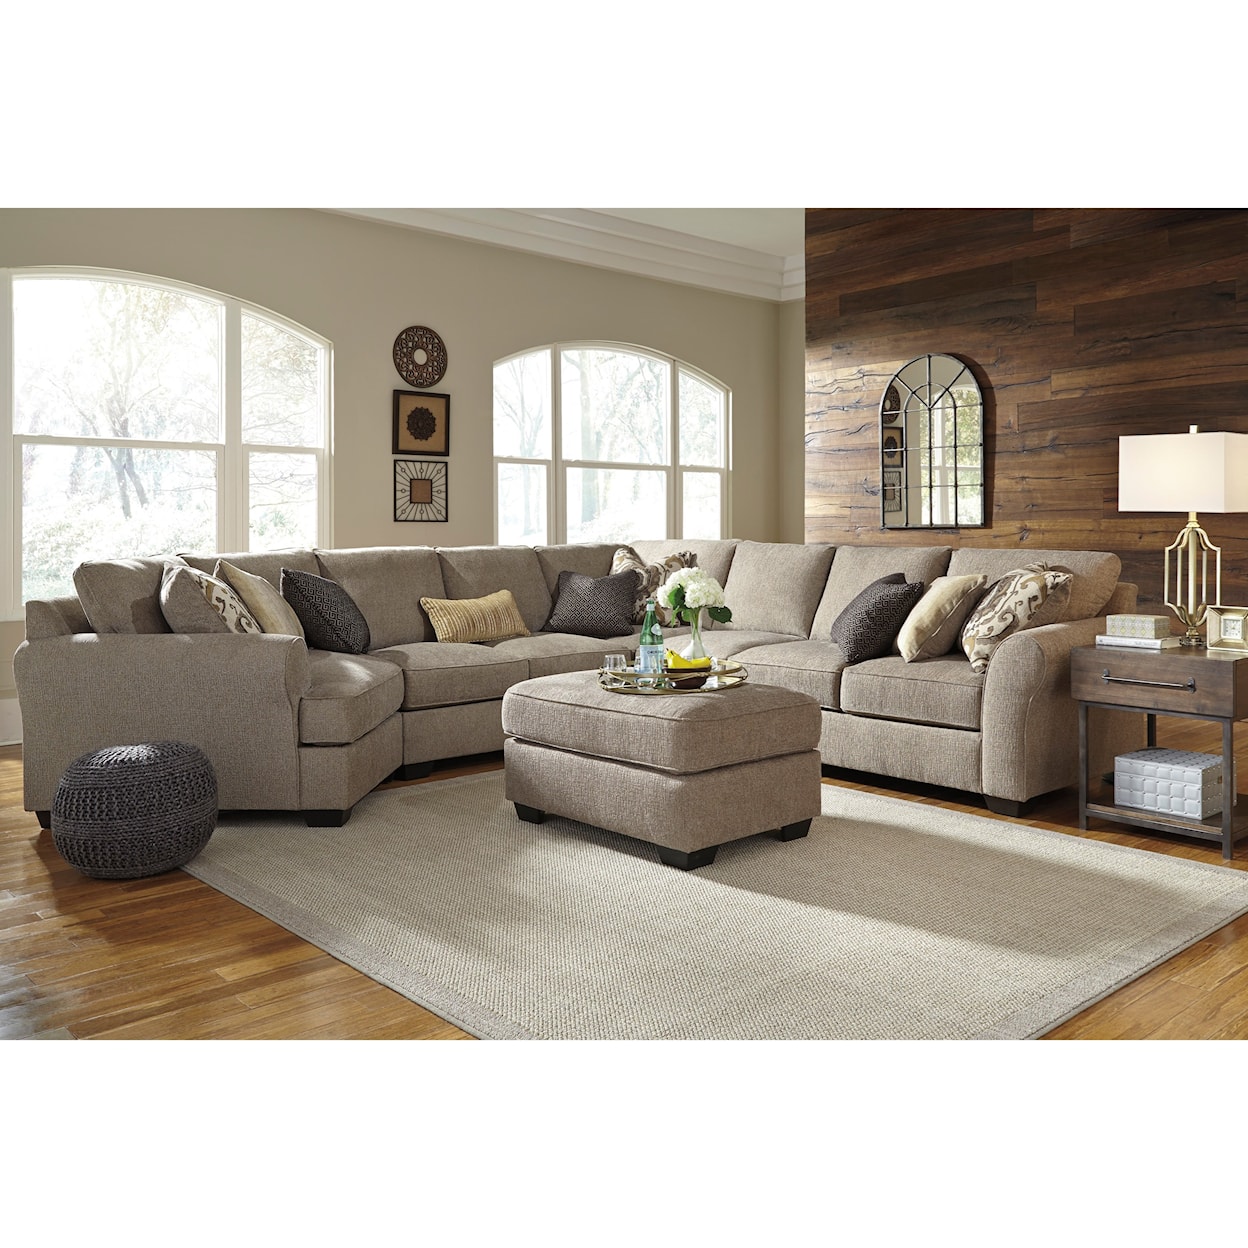 Benchcraft Pantomine 4-Piece Sectional with Ottoman